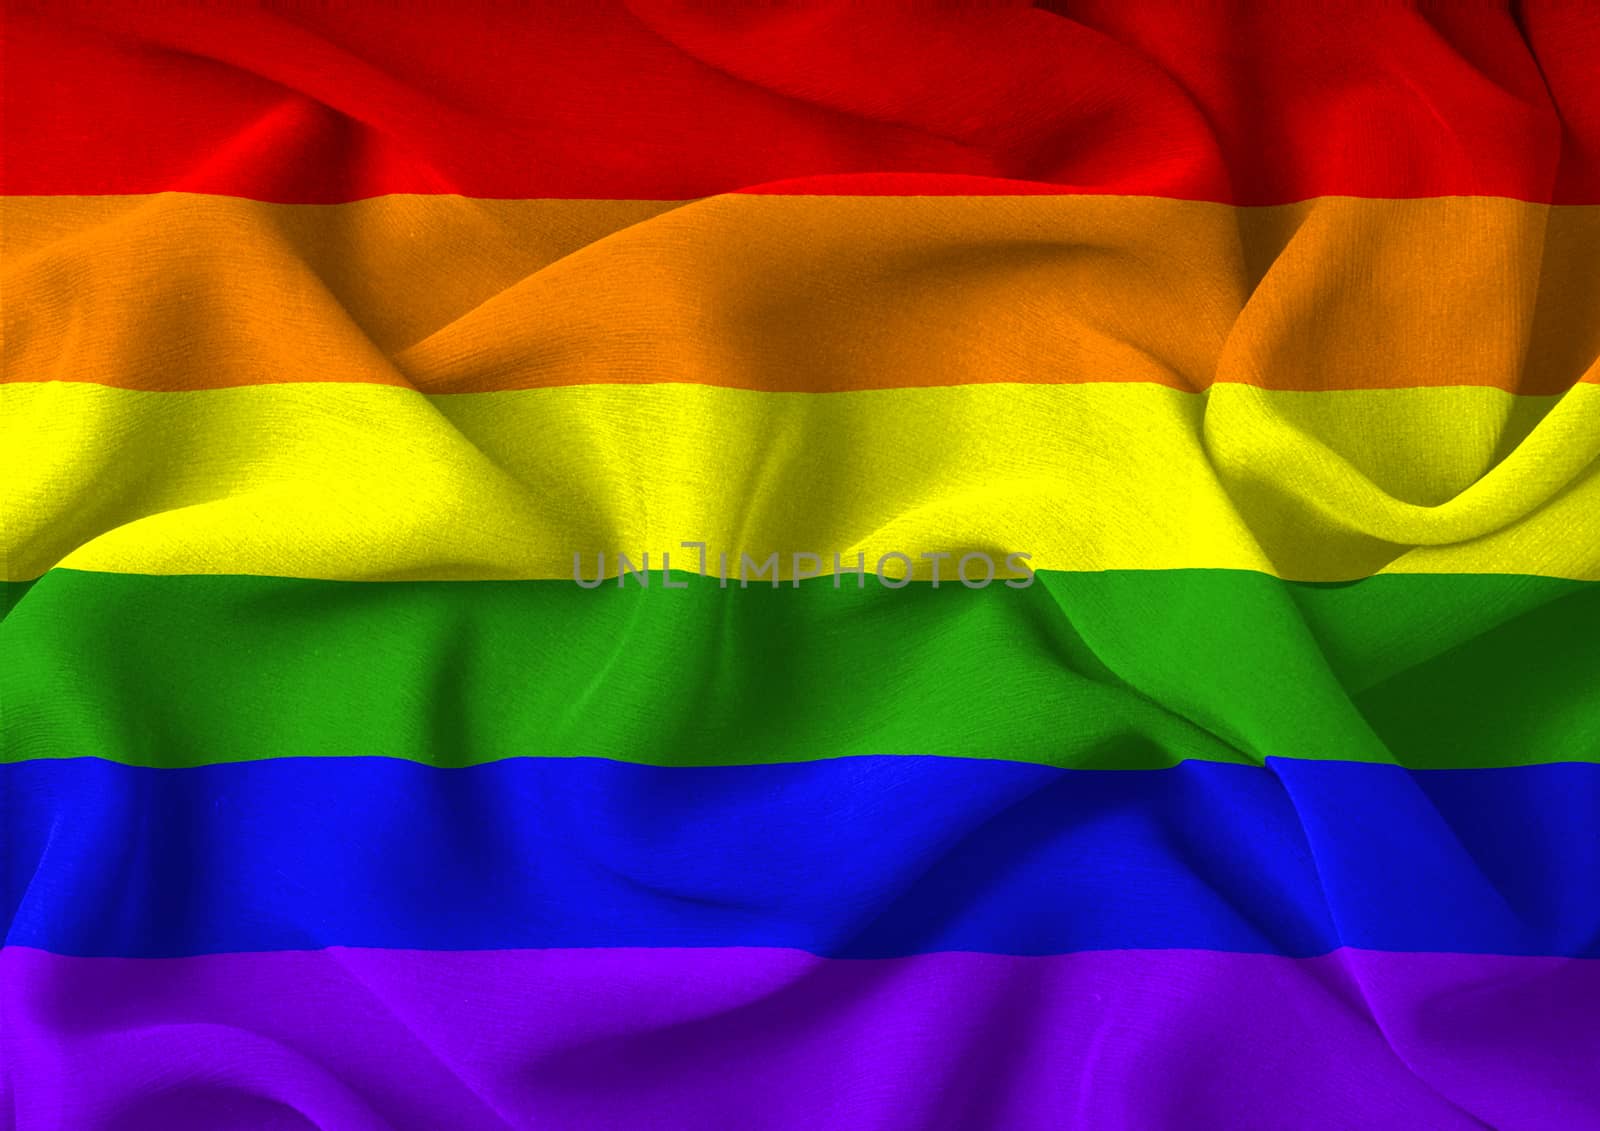 Very large version of the gay pride flag